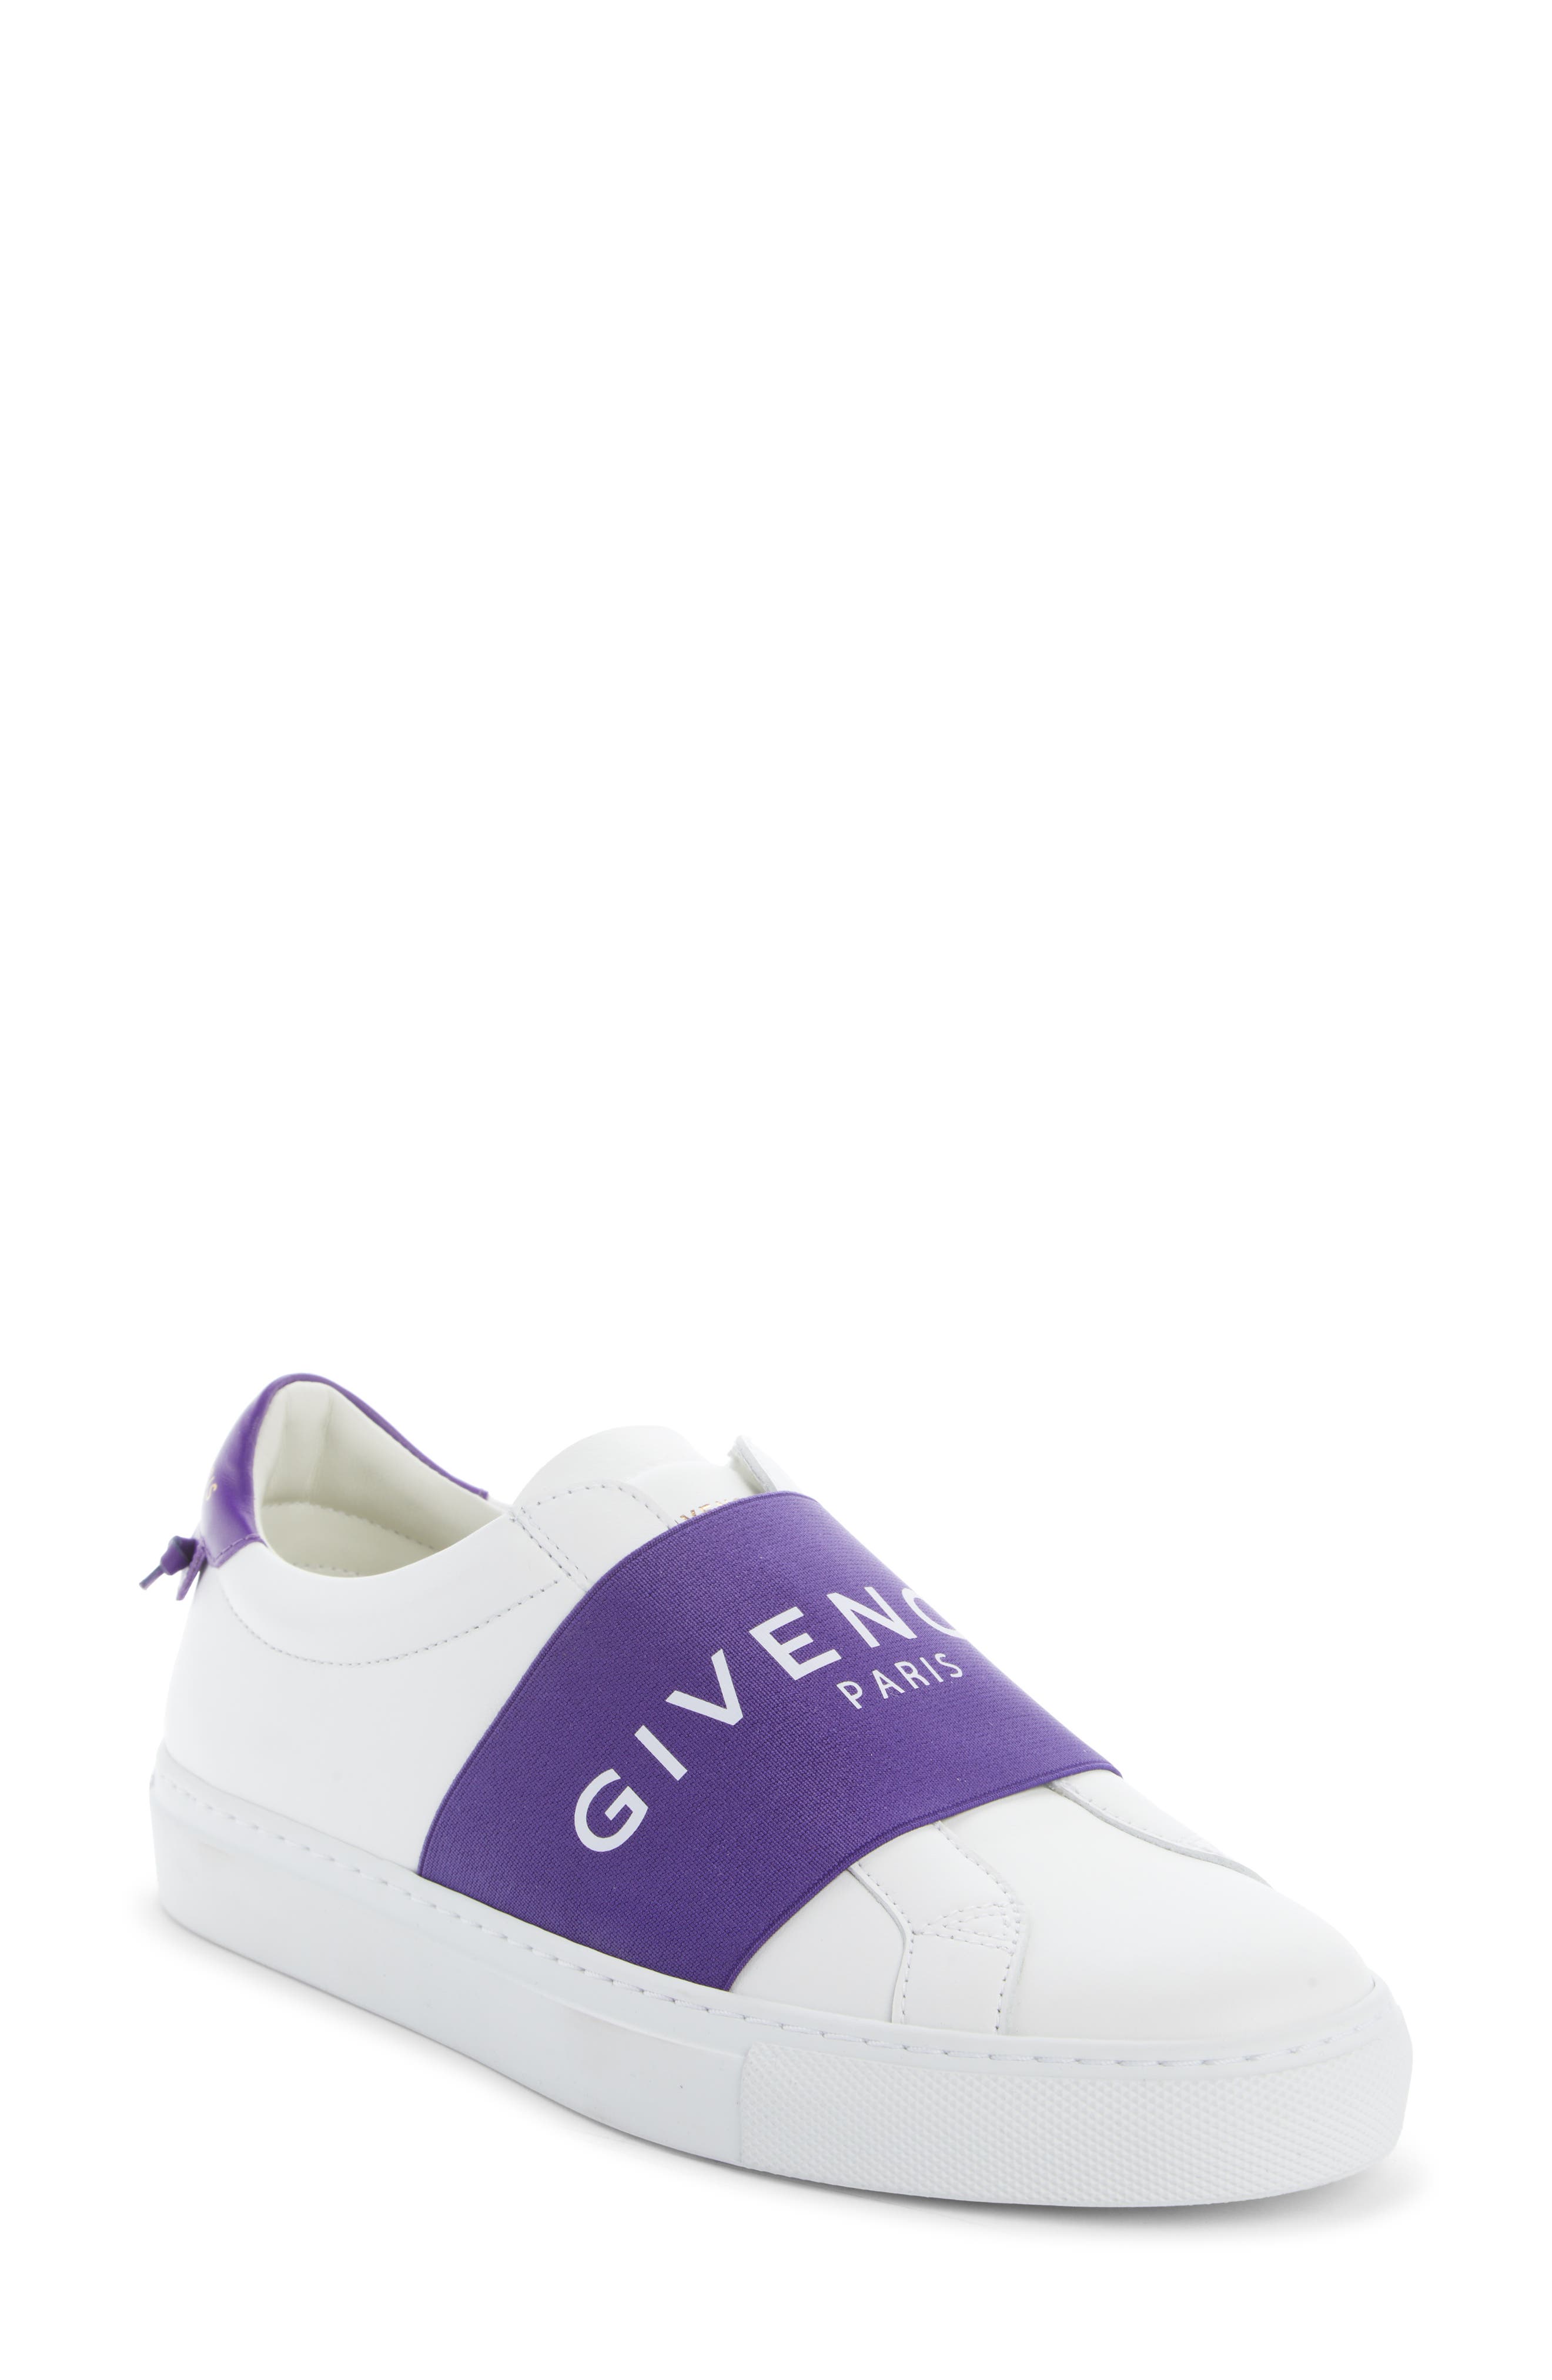 givenchy shoes white